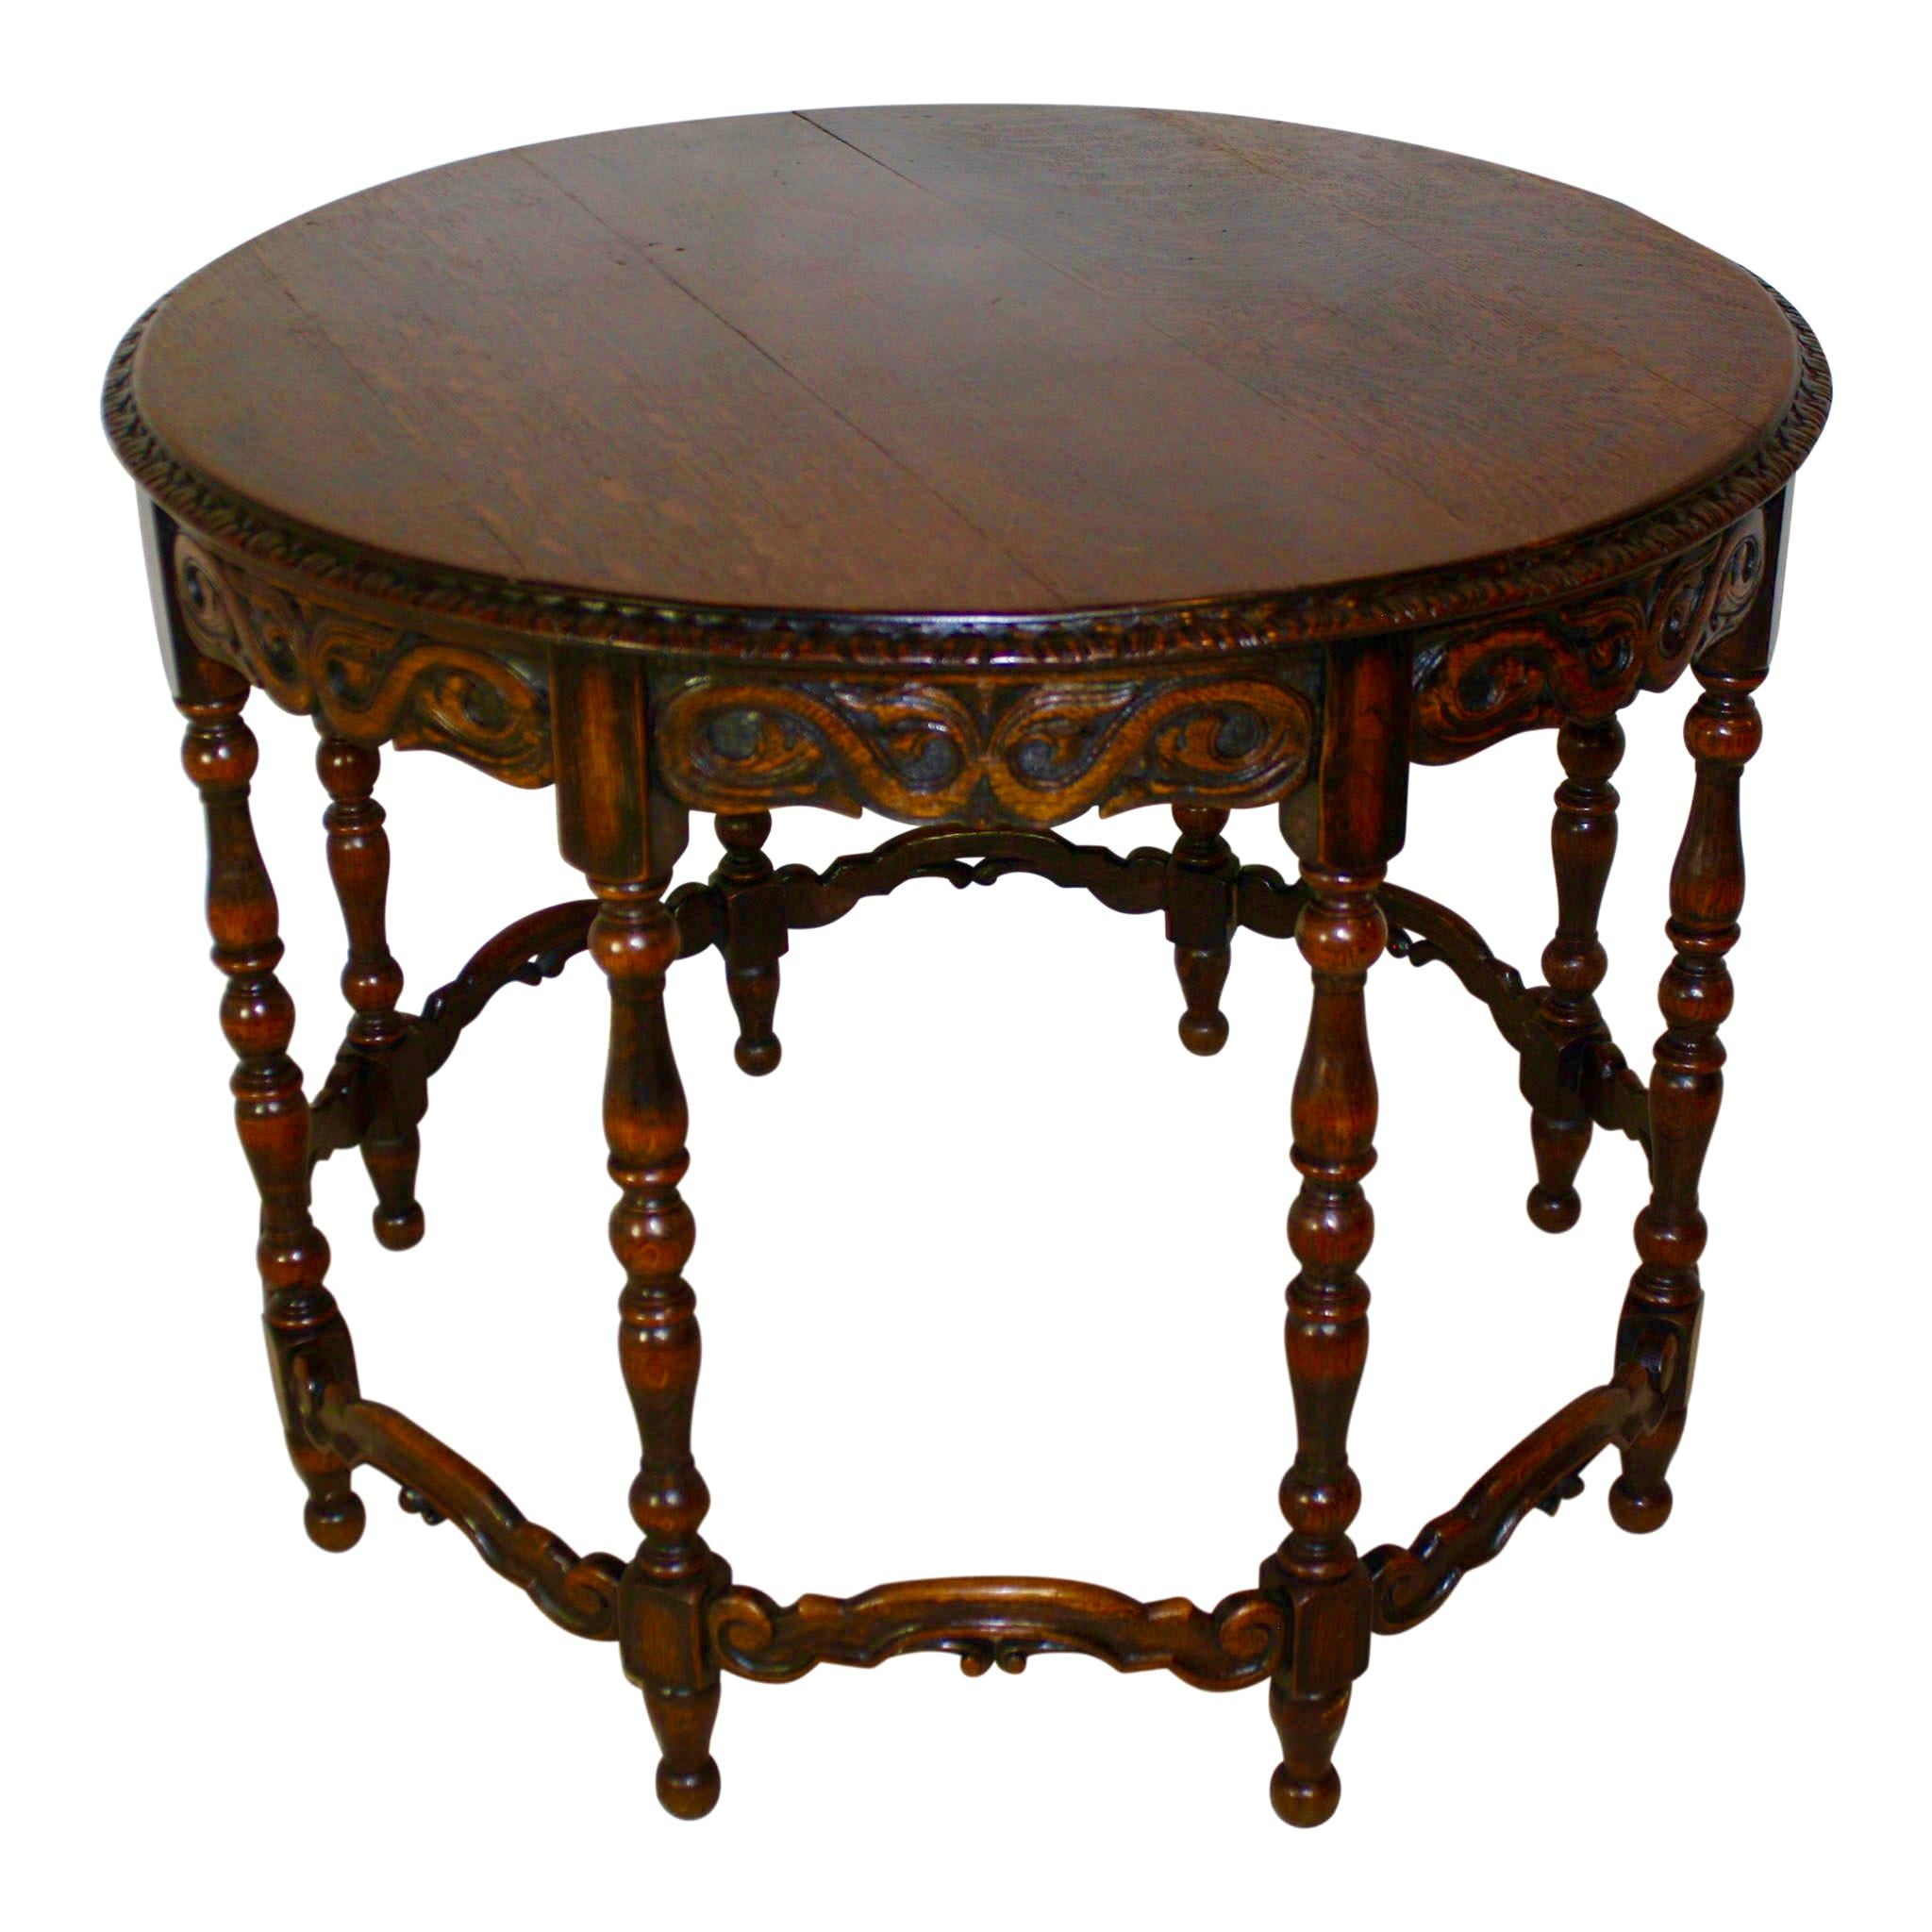 Eight turned legs with ball feet are gracefully connected by carved, ached stretchers, providing stylish support to this round table. The apron beneath the tables carved and beveled edge features opposing S-scrolls, which terminate in acanthus